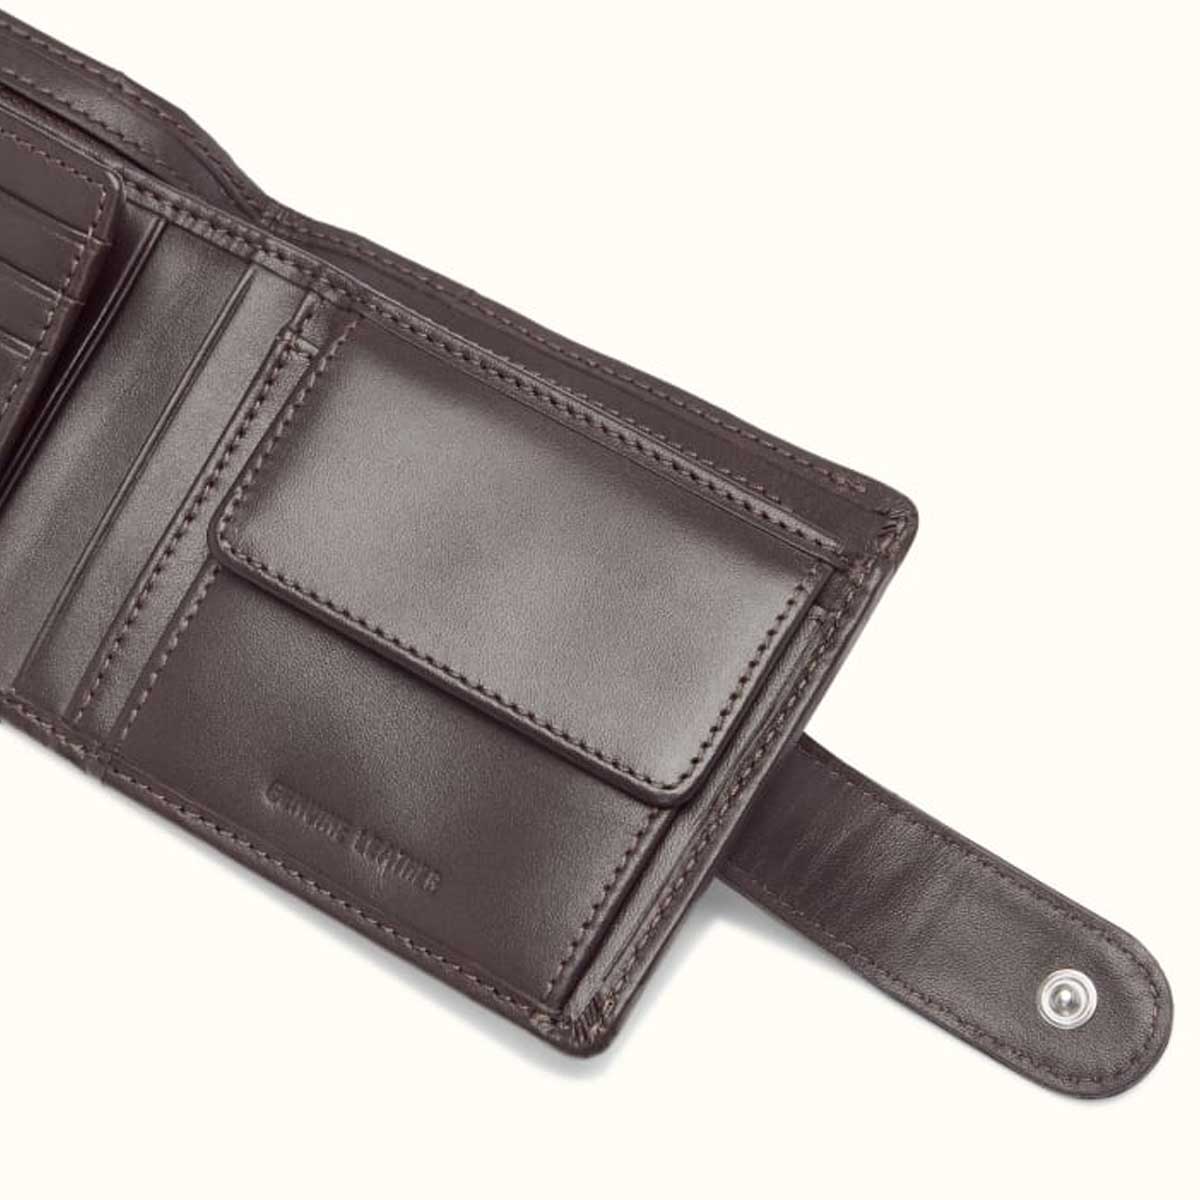 RM Williams - Leather Wallet with Coin Pocket & Tab - Brown